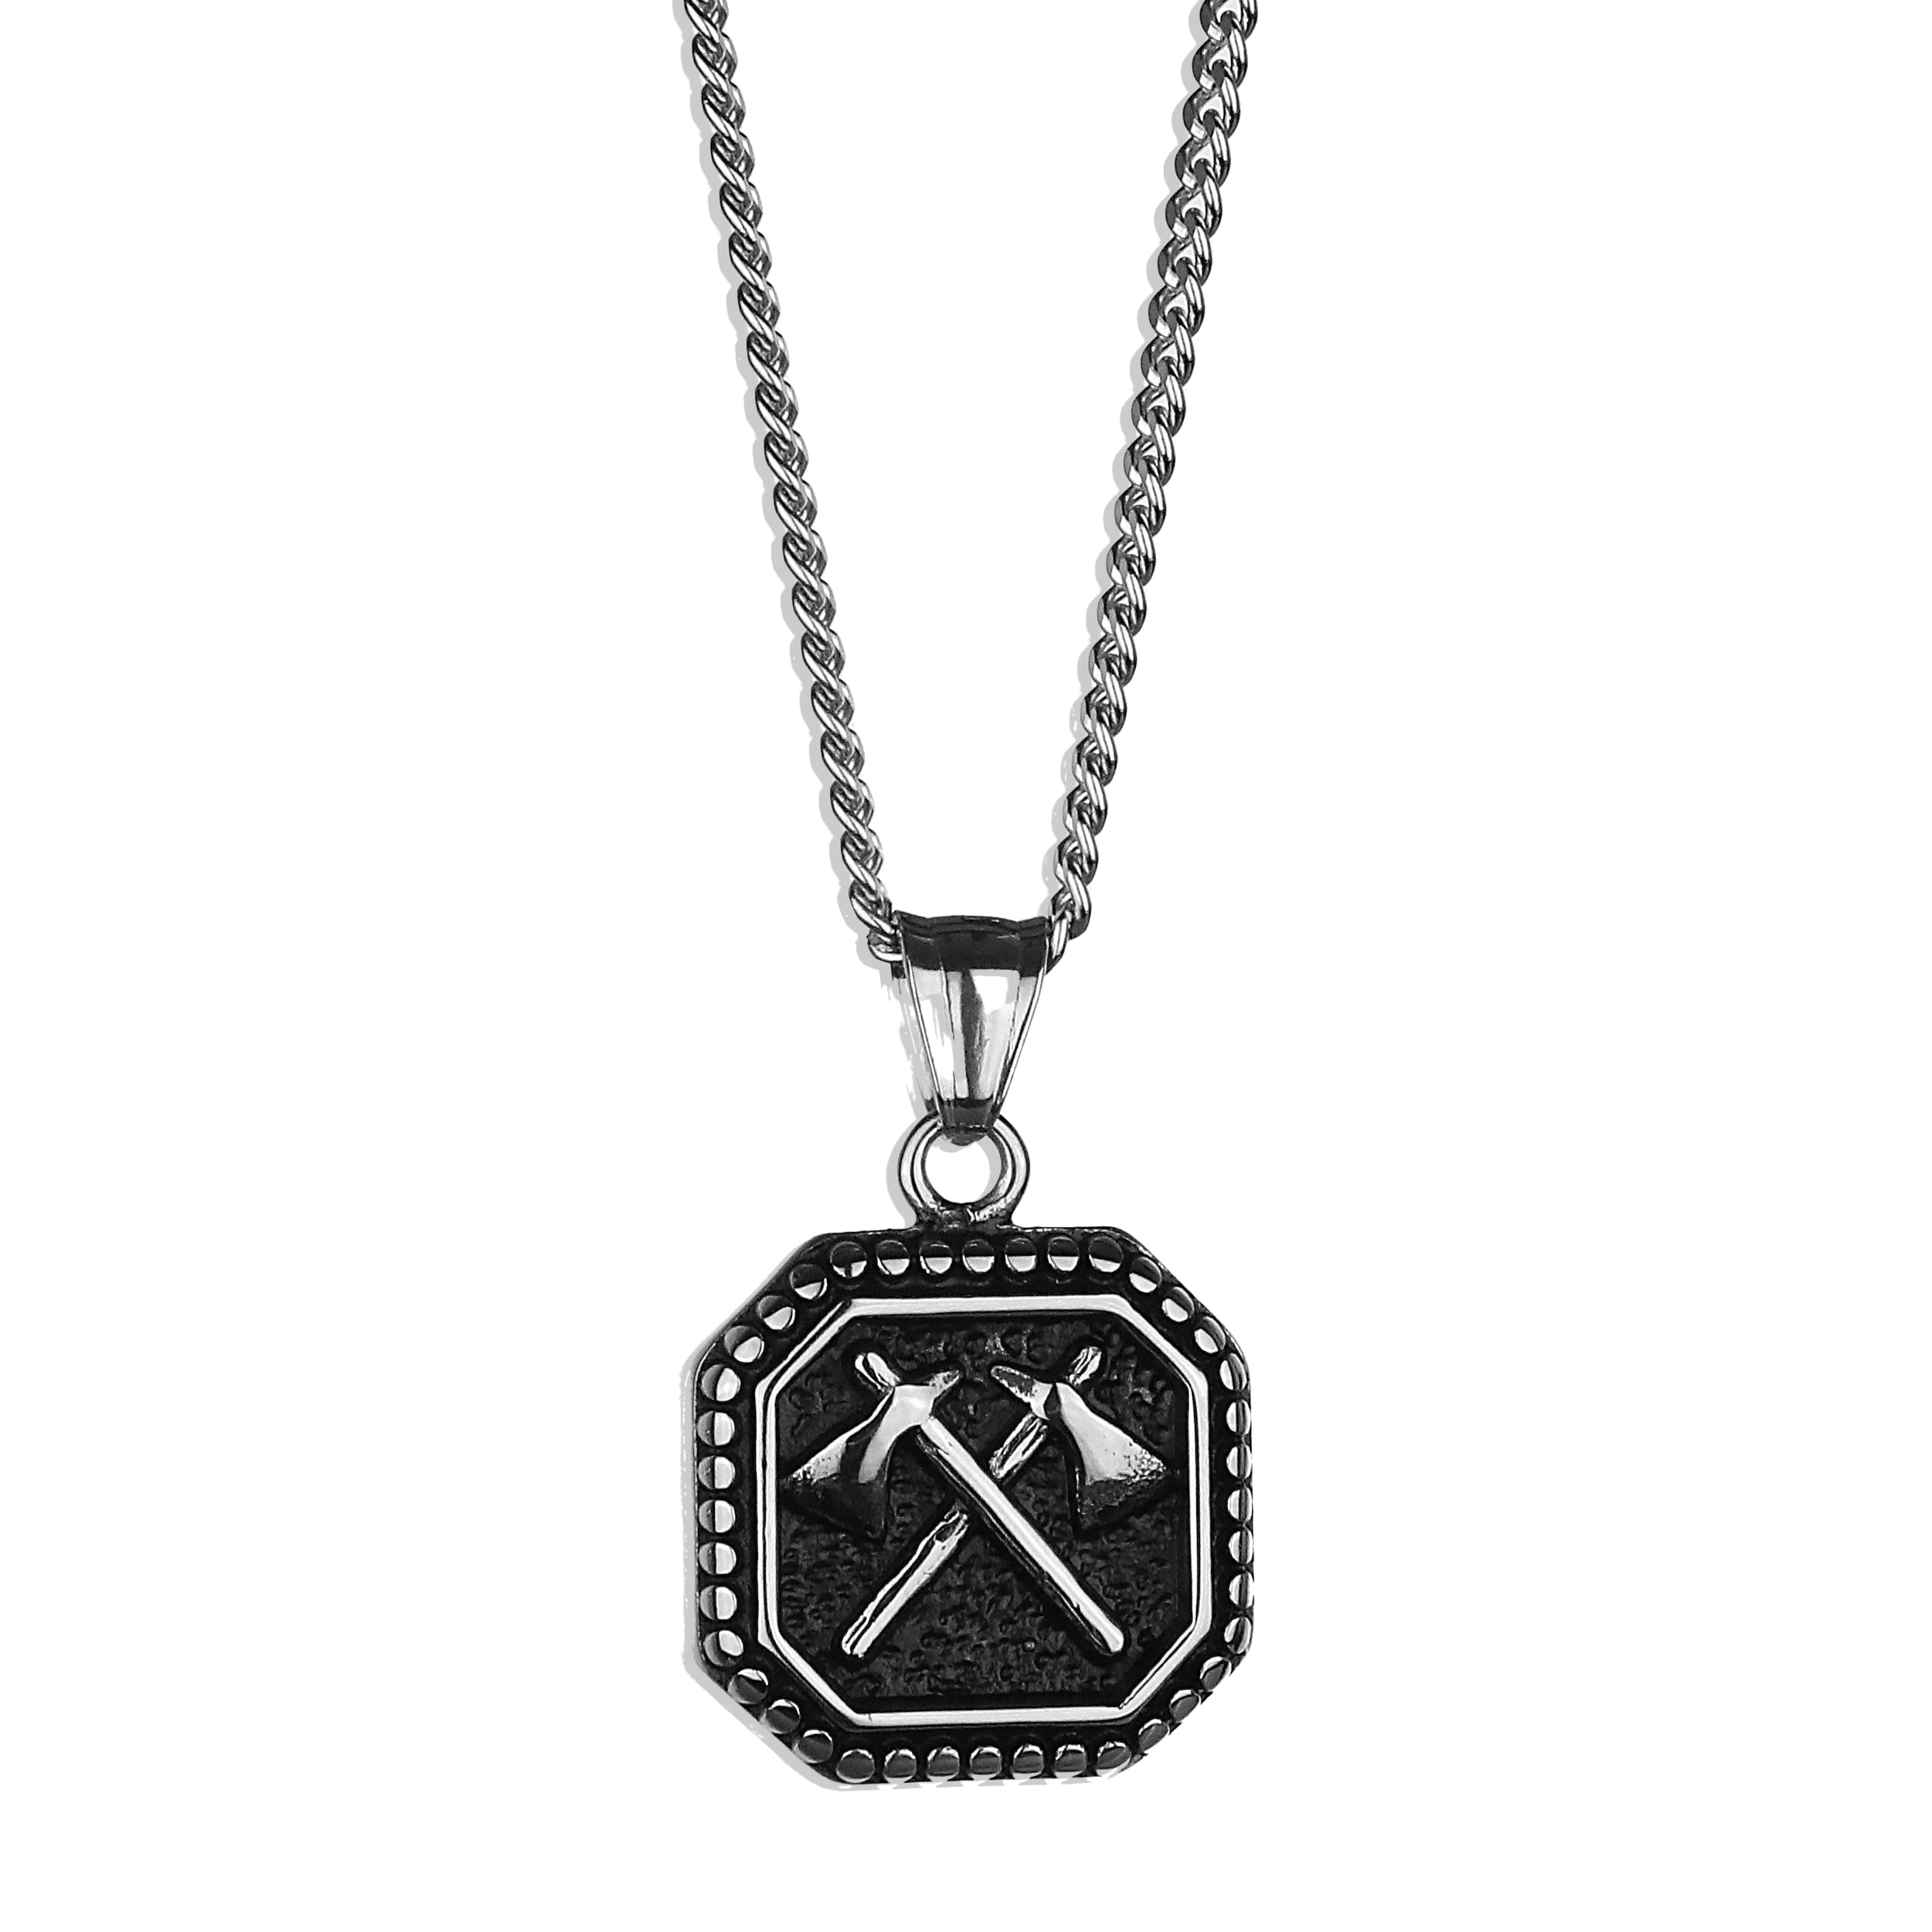 Crossed Axes Necklace - Silver x Black